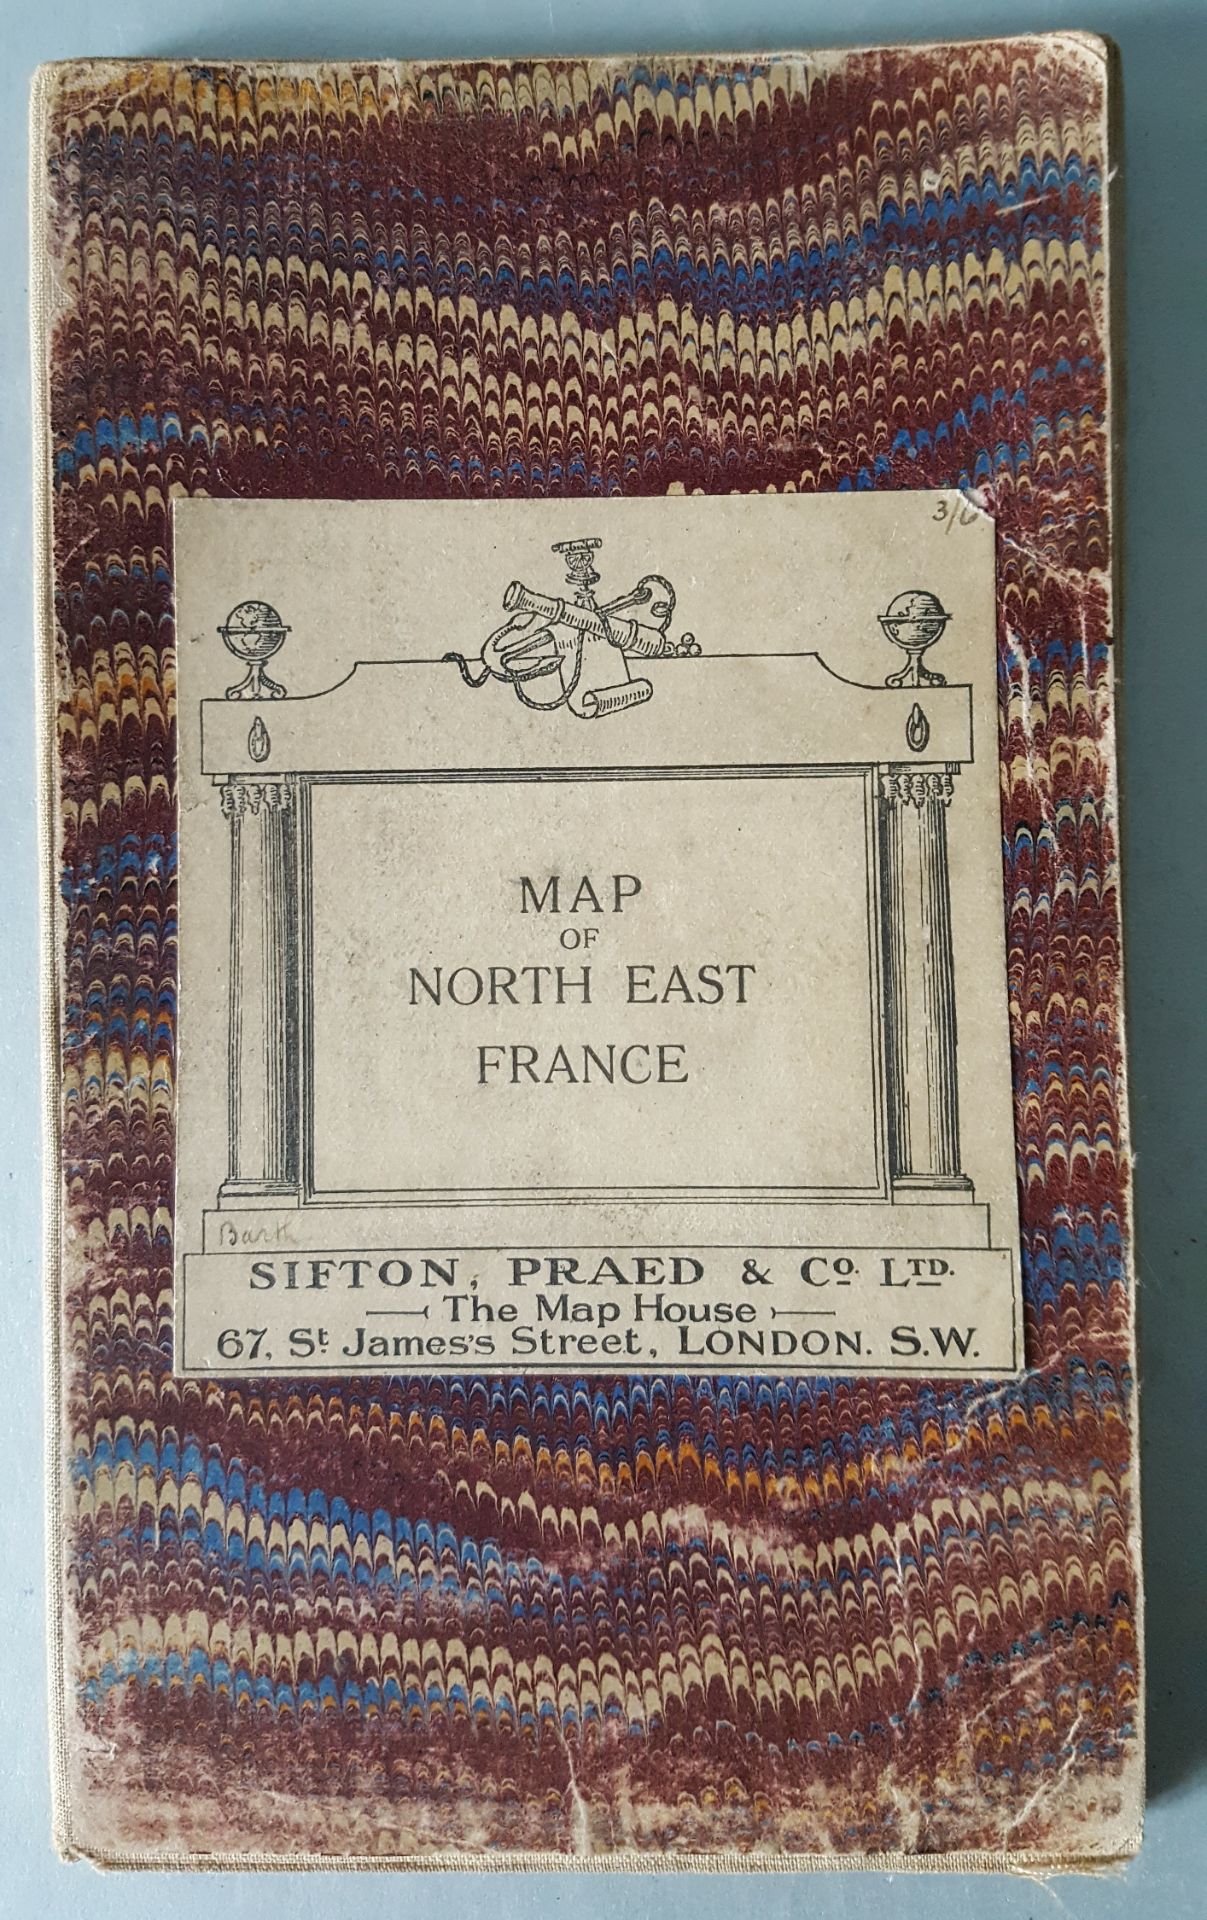 Military WWI Memorabilia. Includes Table Covers Postcard Map Memorial Service Etc - Image 3 of 10